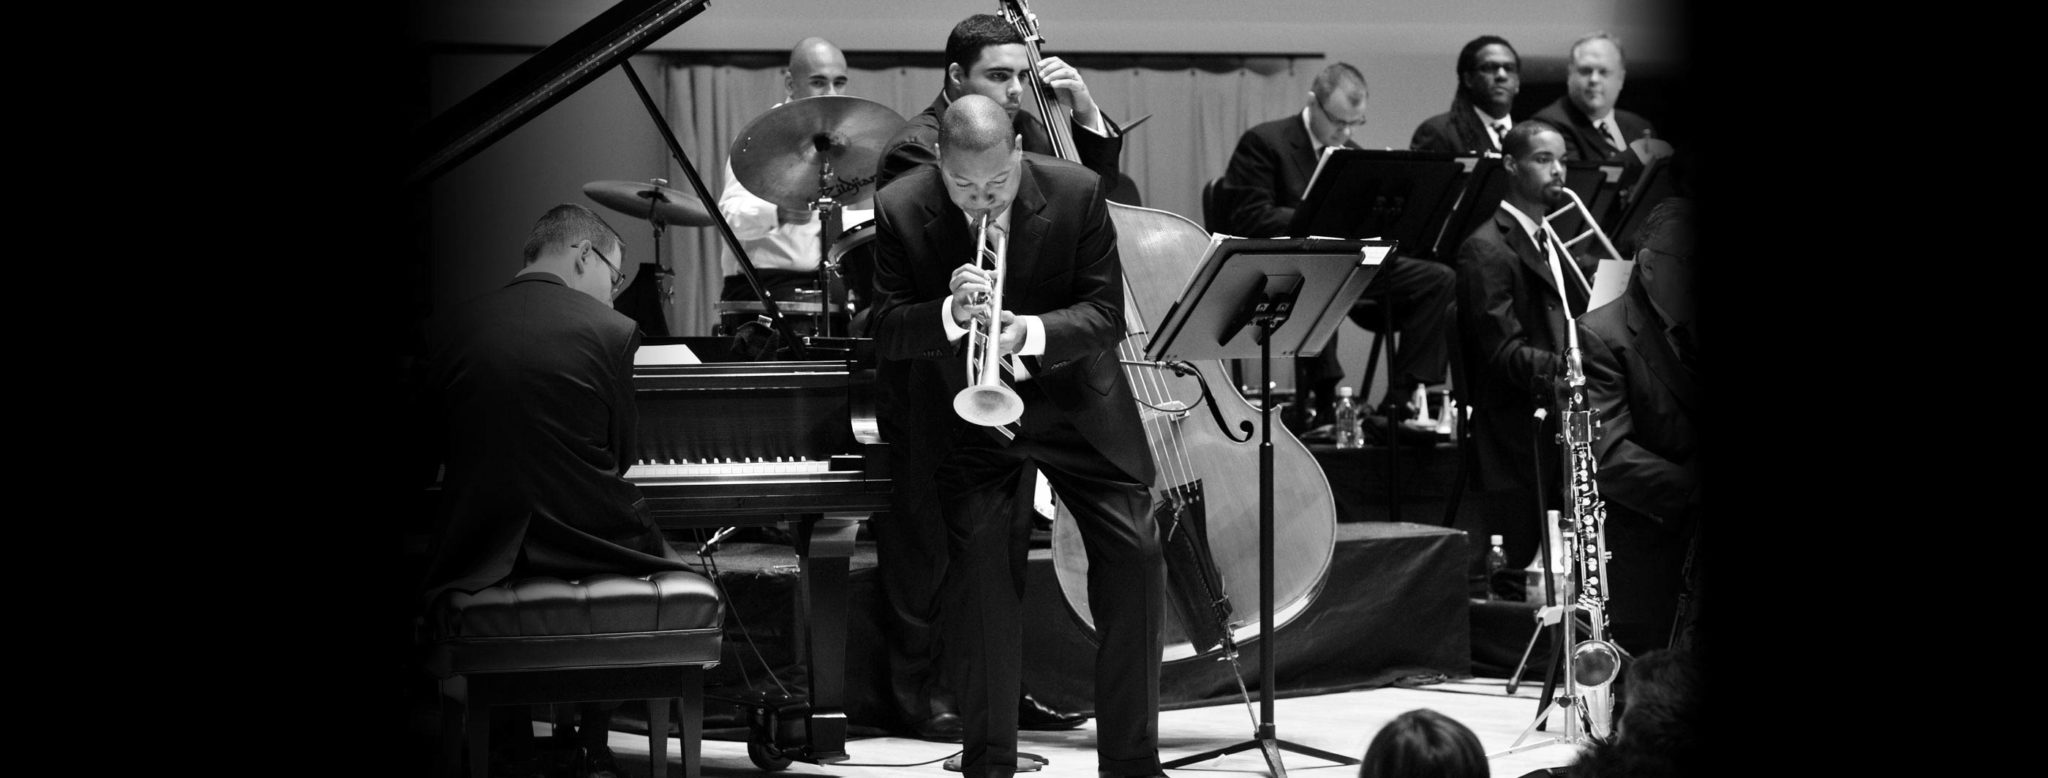 Wynton Marsalis bends to the music during a concert. (Credit: Frank Stewart)